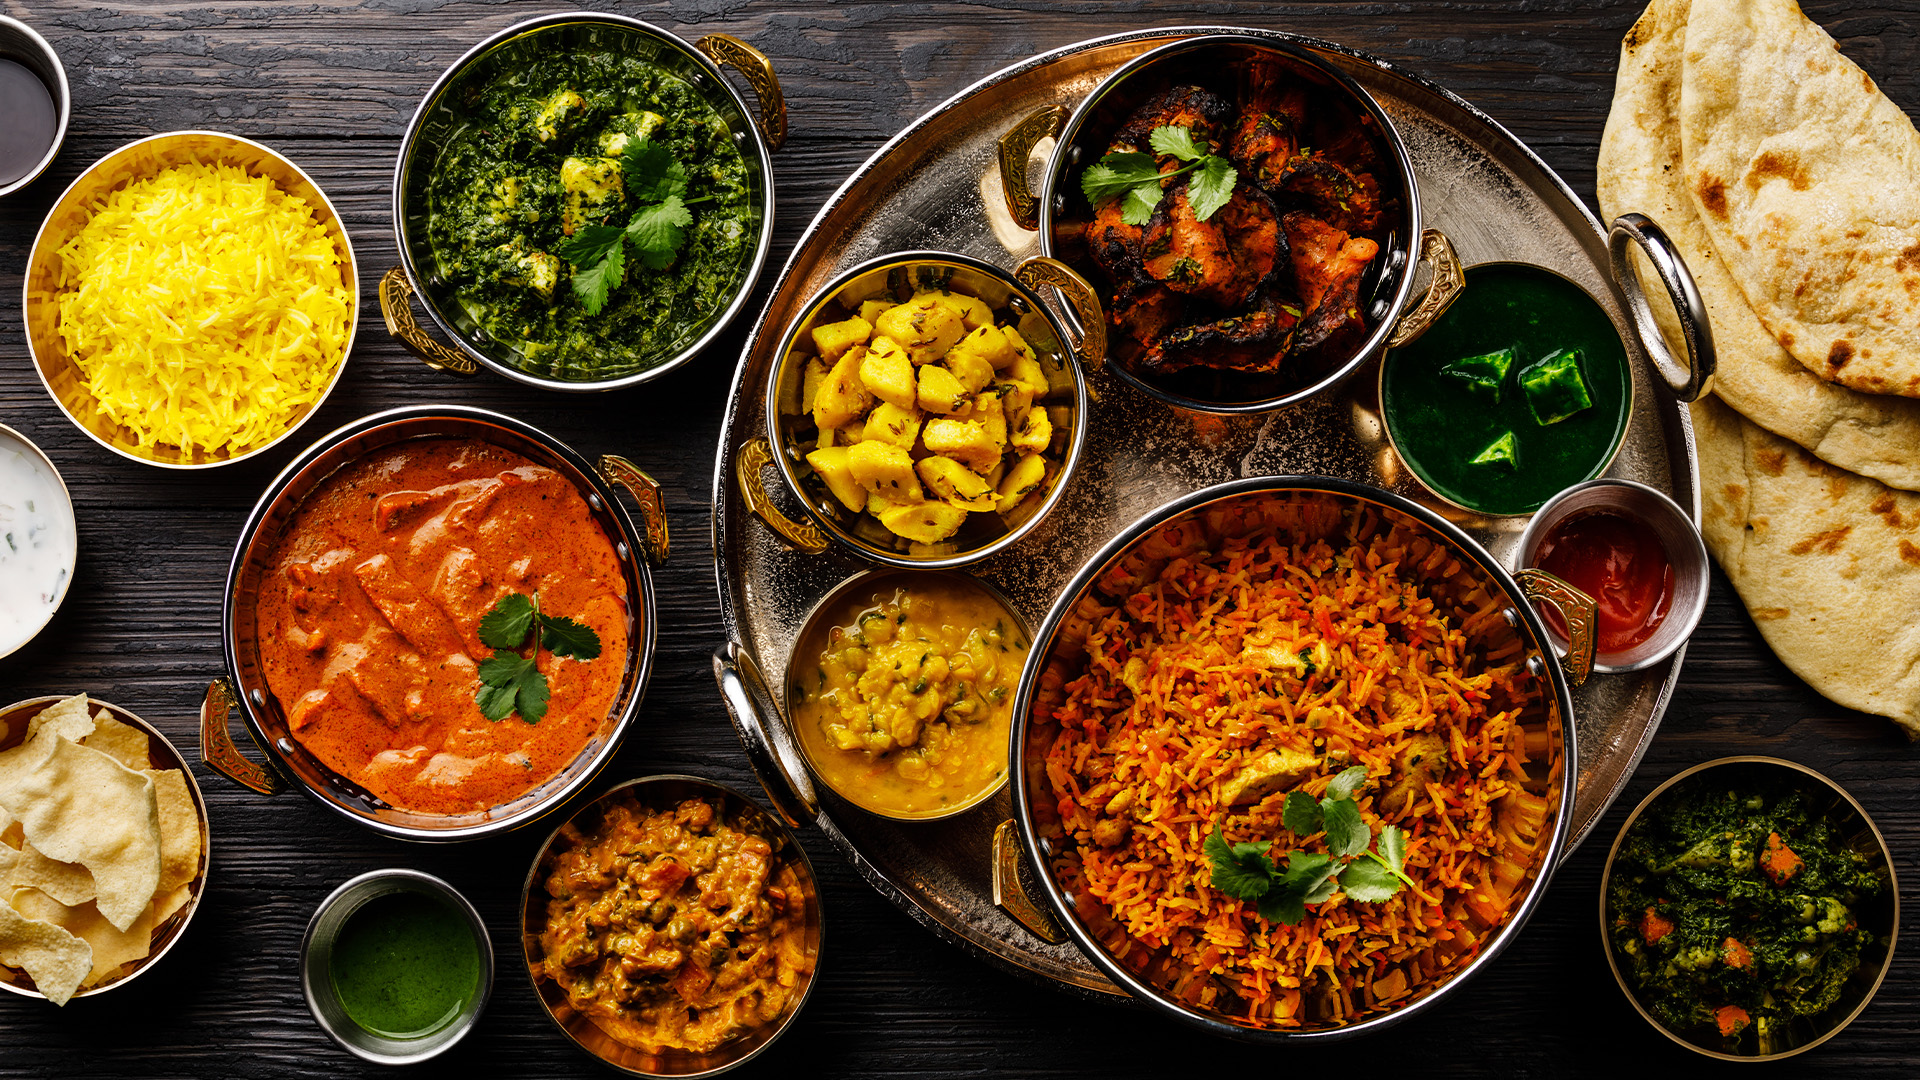 A delicious spread of North Indian delicacies like butter chicken, palak paneer, jeera alu, specially found in India's Golden Triangle – Luxury Escapes